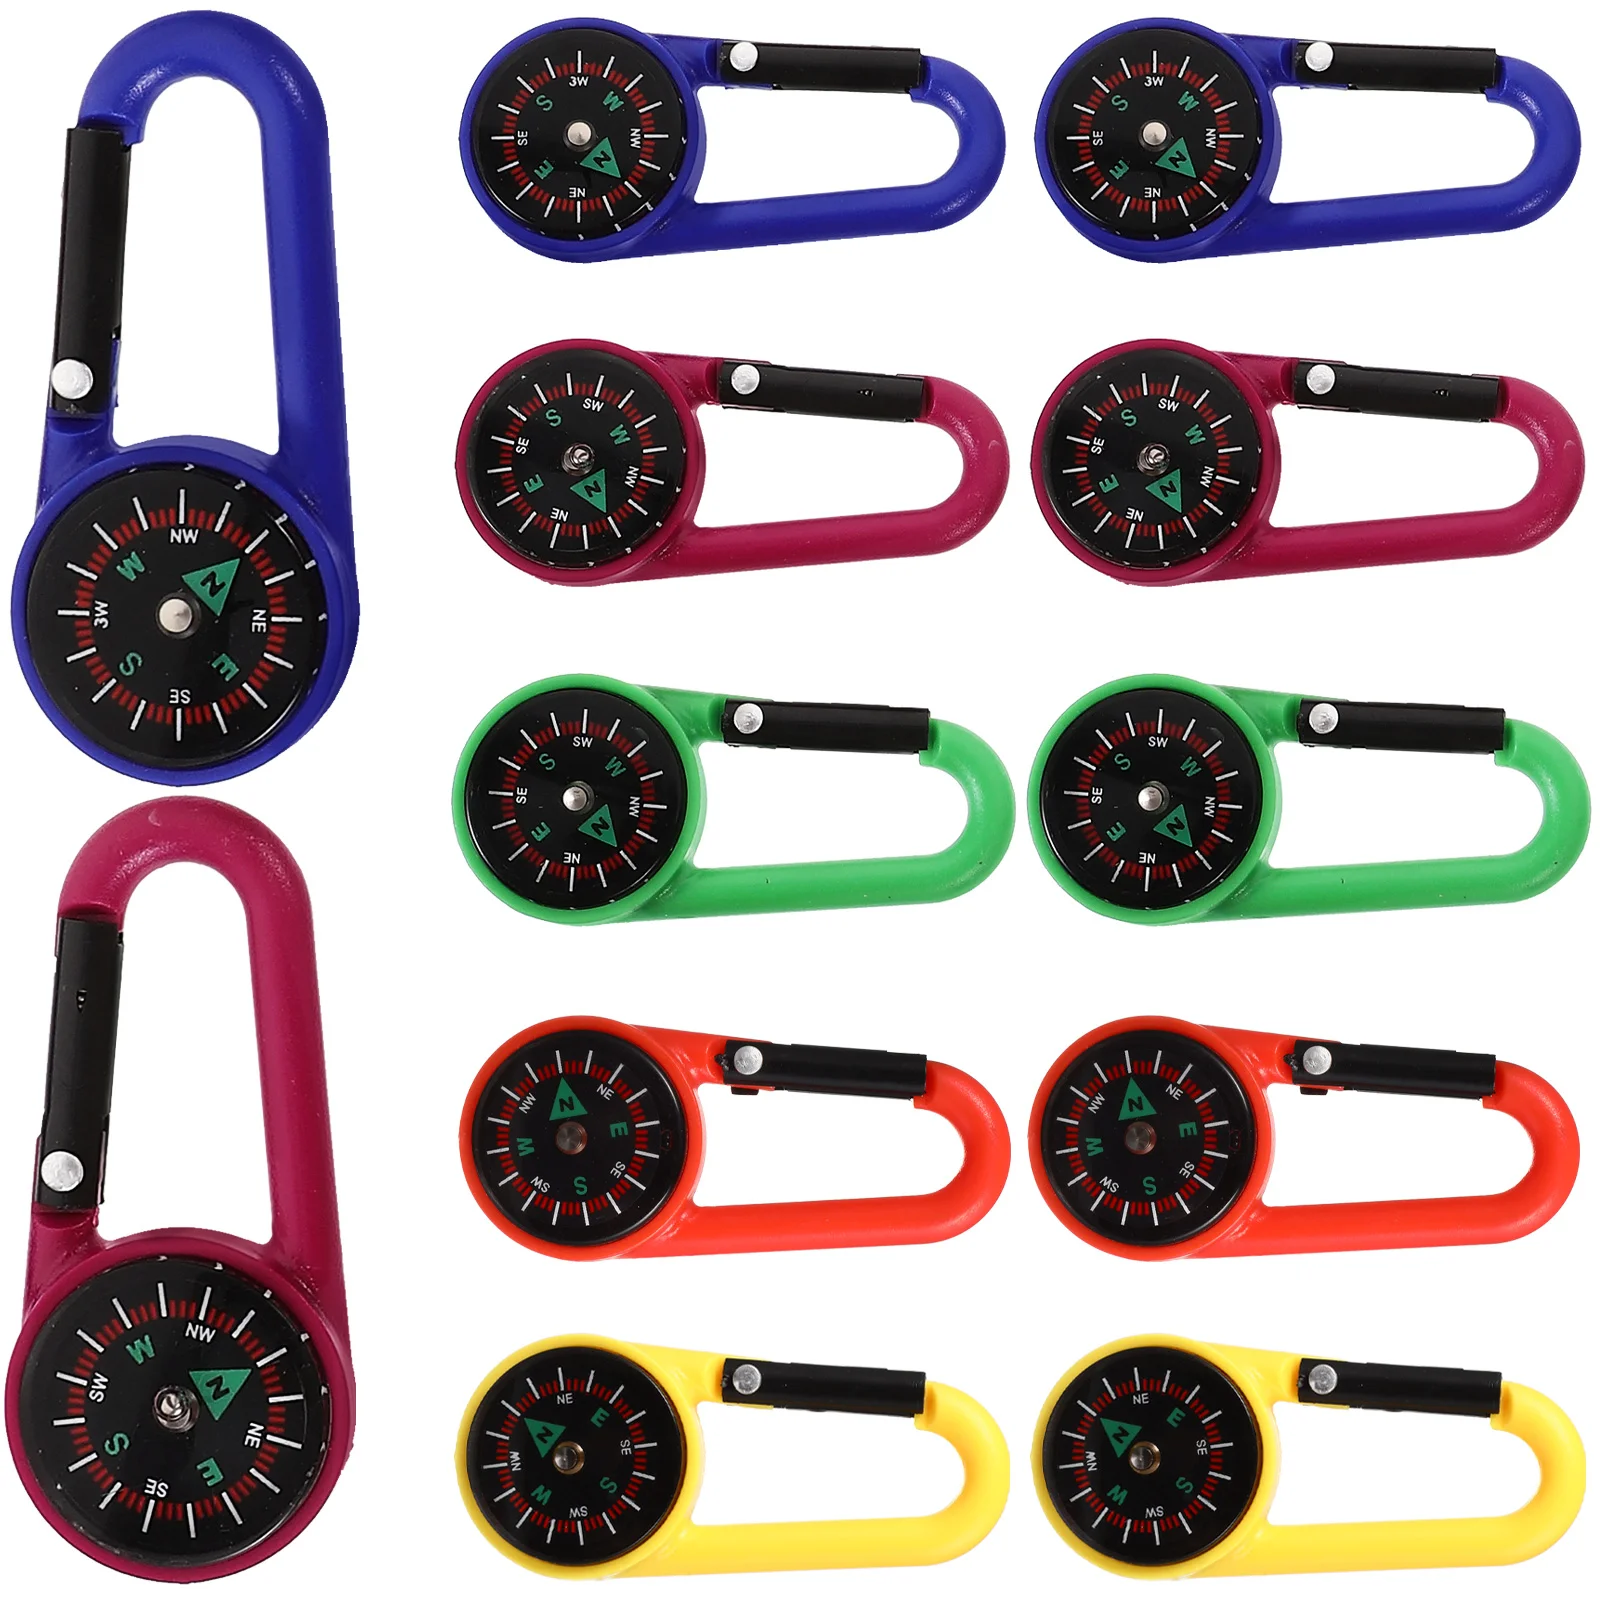 

12pcs Carabiner Compasses for Kids Compass Belt Clips Outdoor Camping School Prizes Party Favor ( Random Colors )